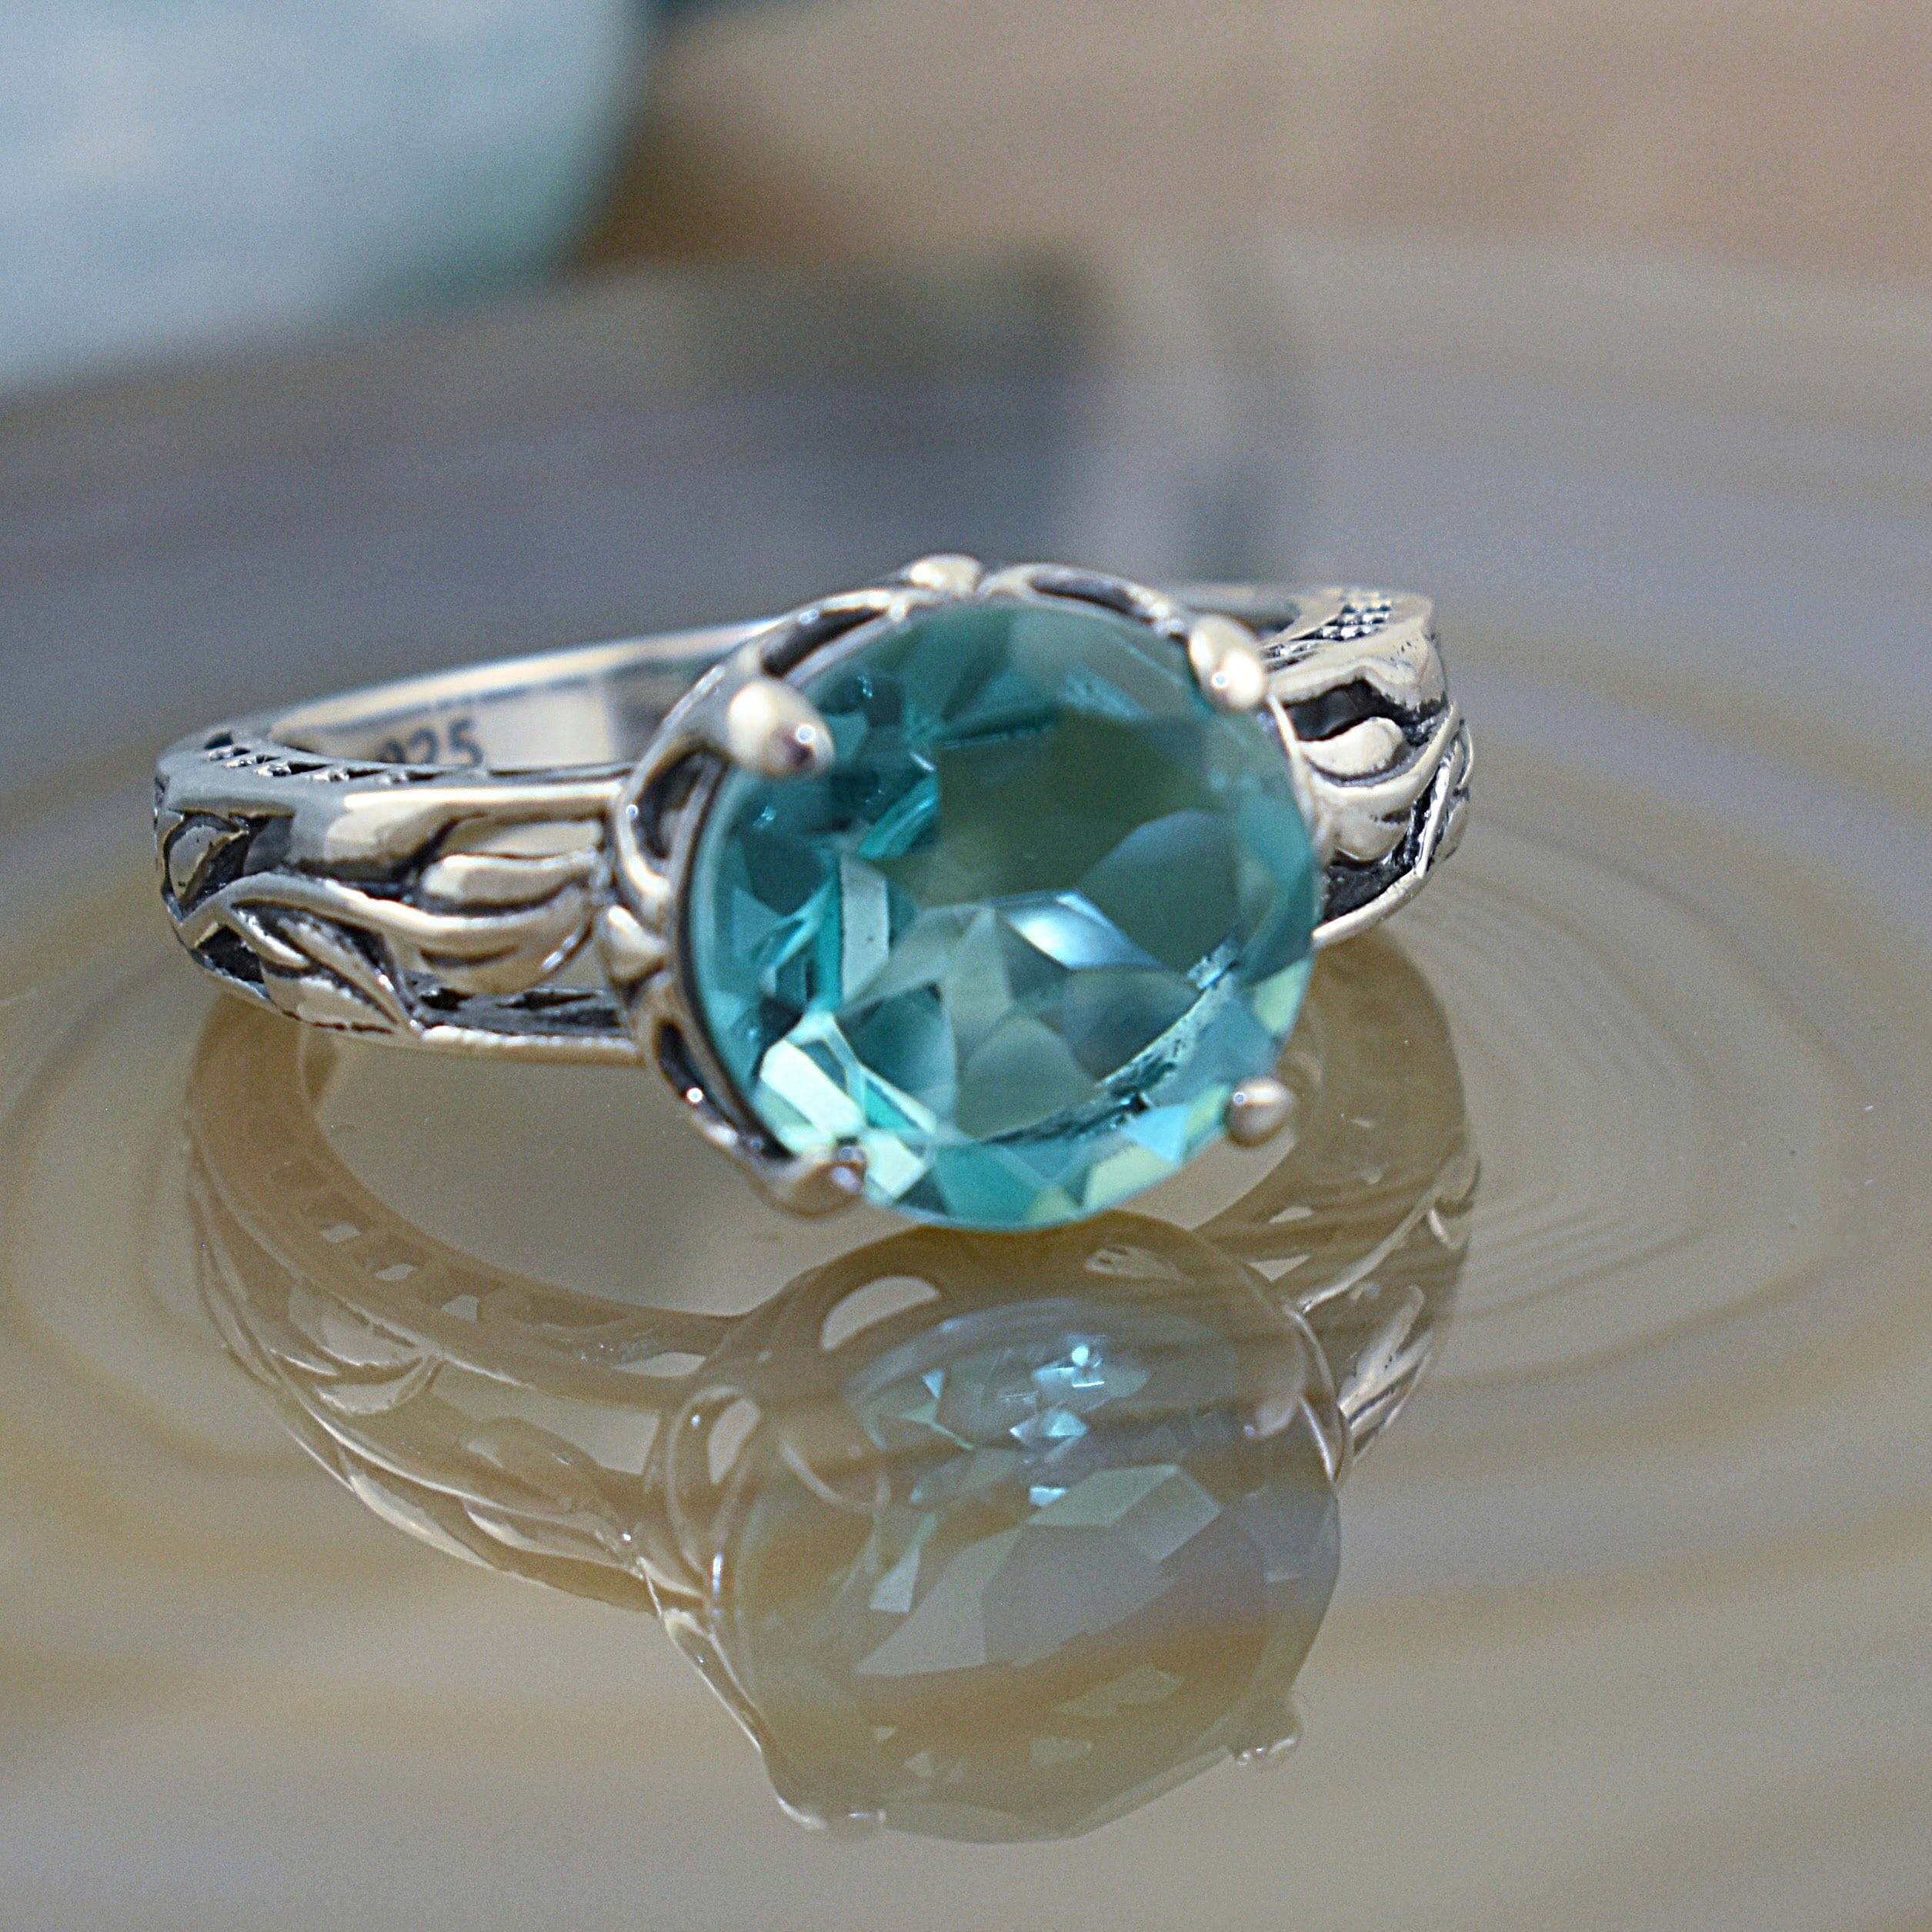 Faux Aqua Doublet ring set in antiqued sterling silver